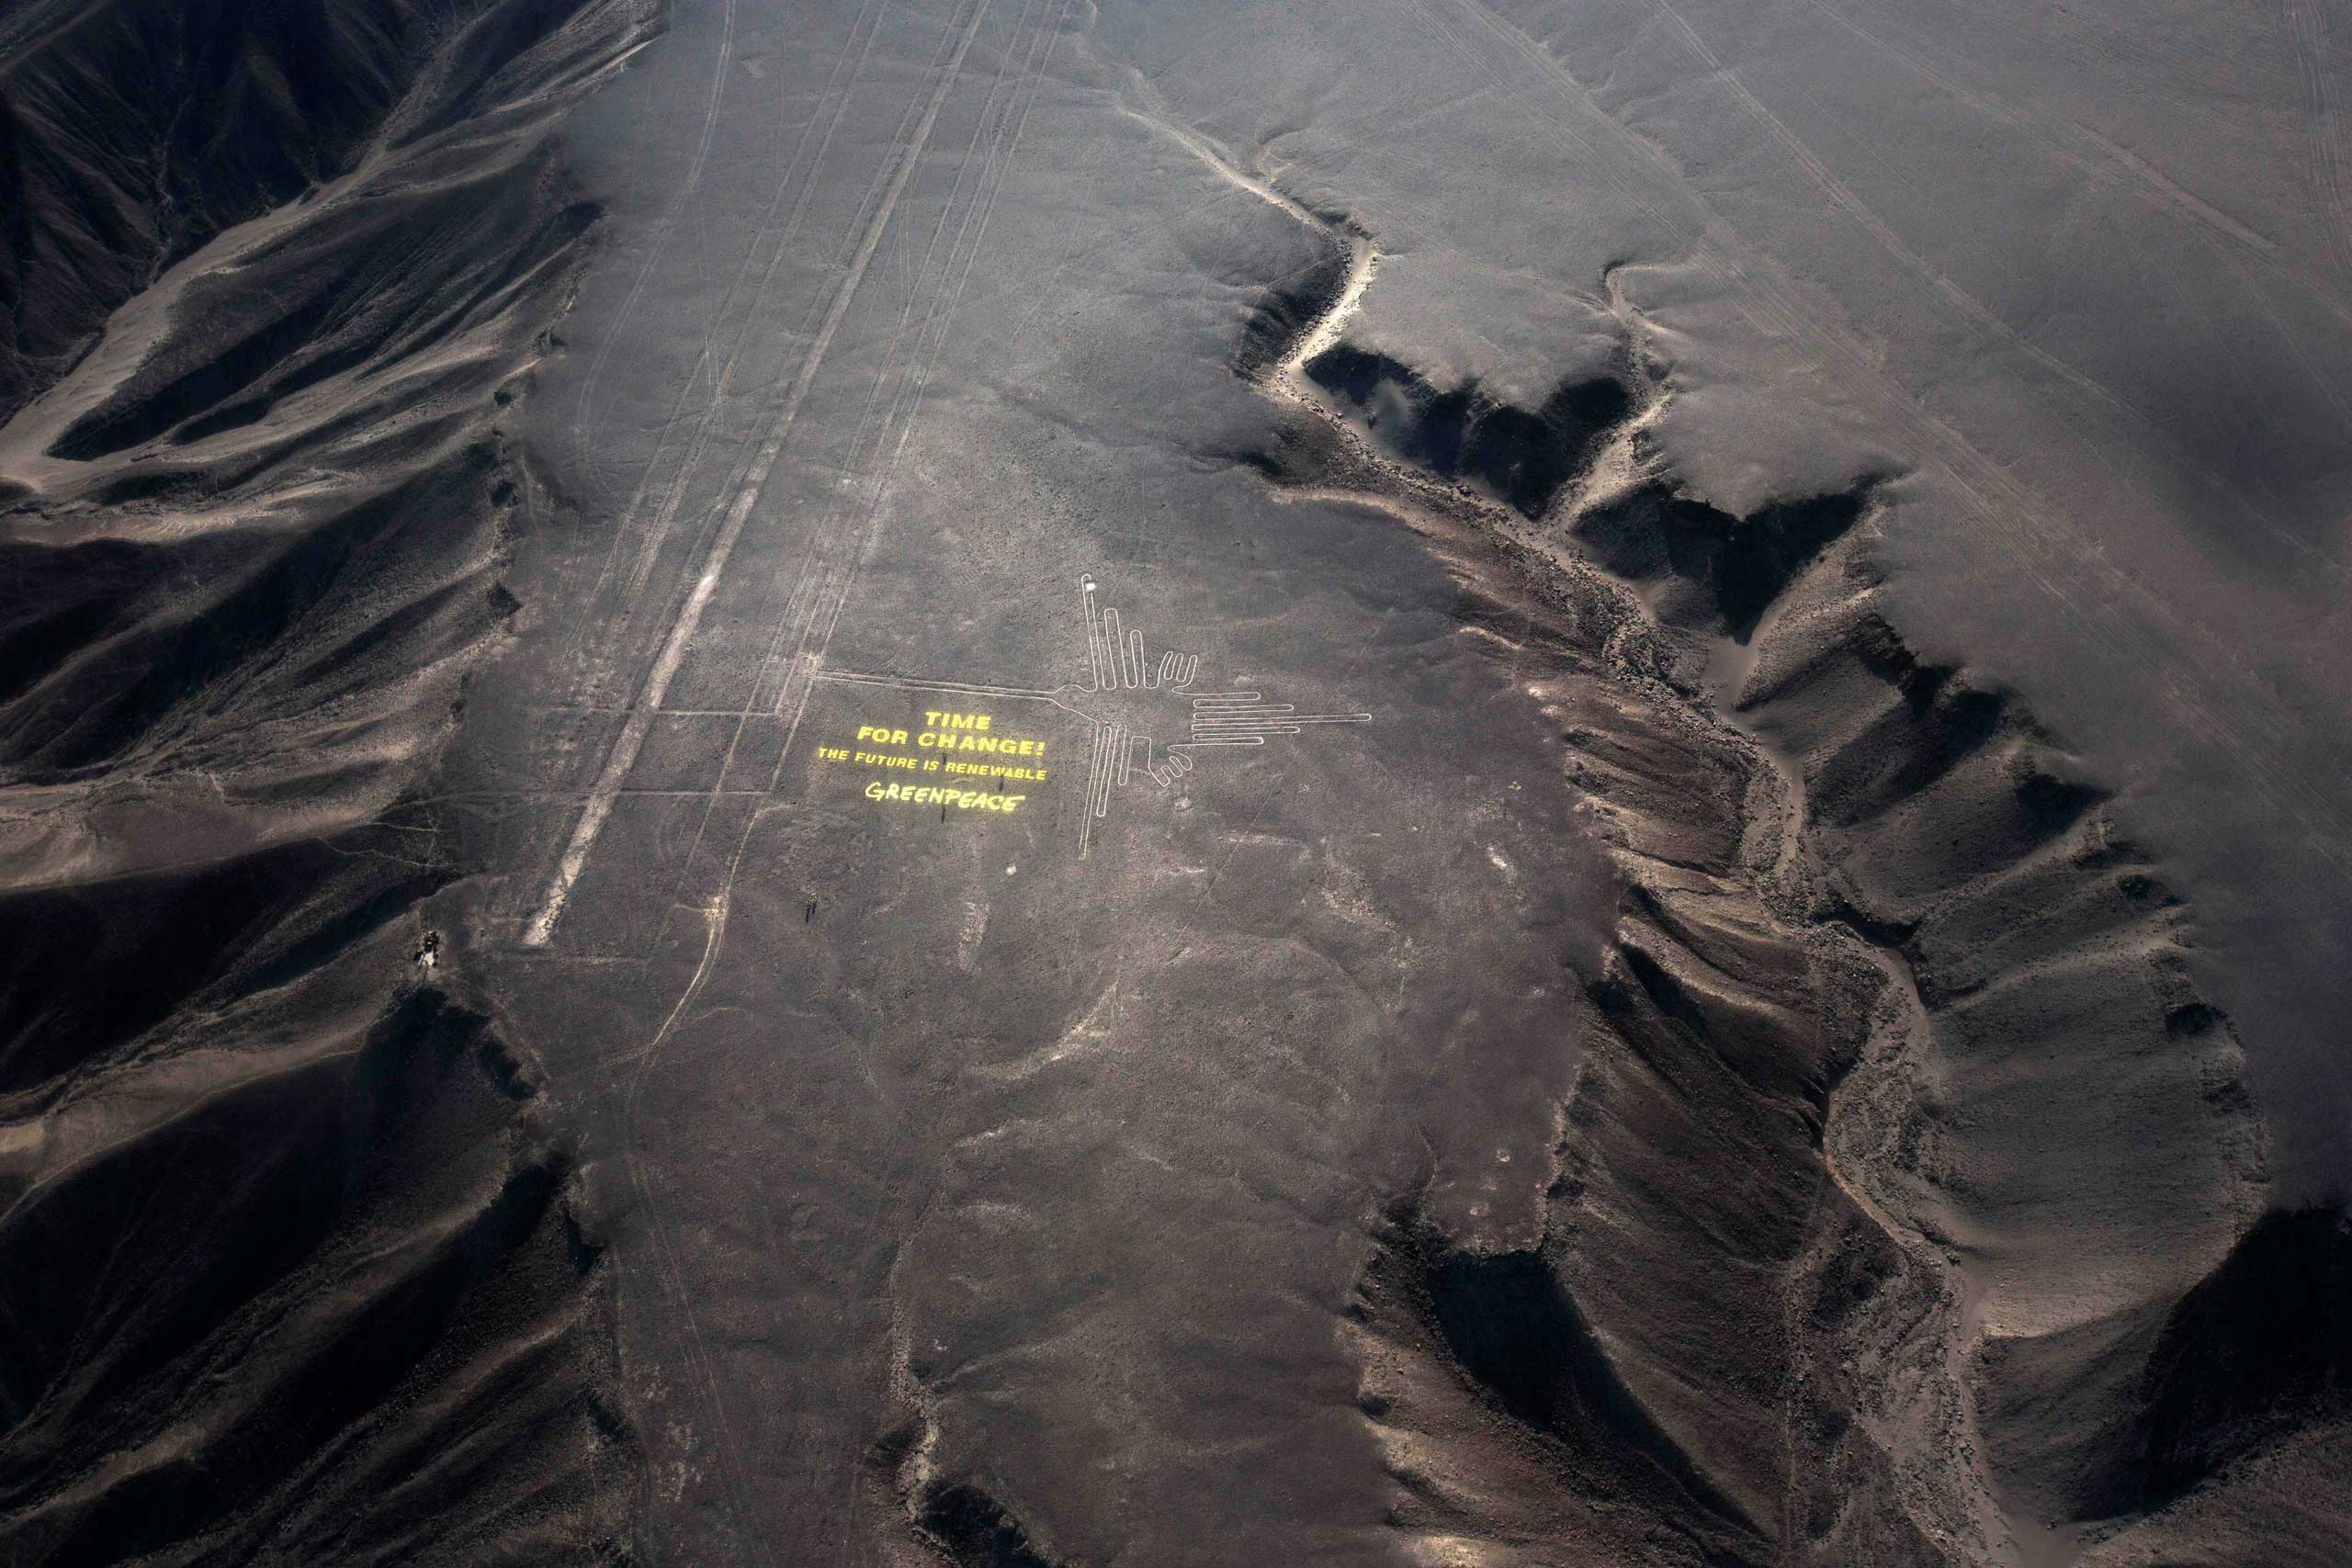 Greenpeace activists stand next to massive letters delivering the message "Time for Change: The Future is Renewable," next to the hummingbird geoglyph in Nazca in Peru,, Dec. 8, 2014. (Rodrigo Abd—AP)